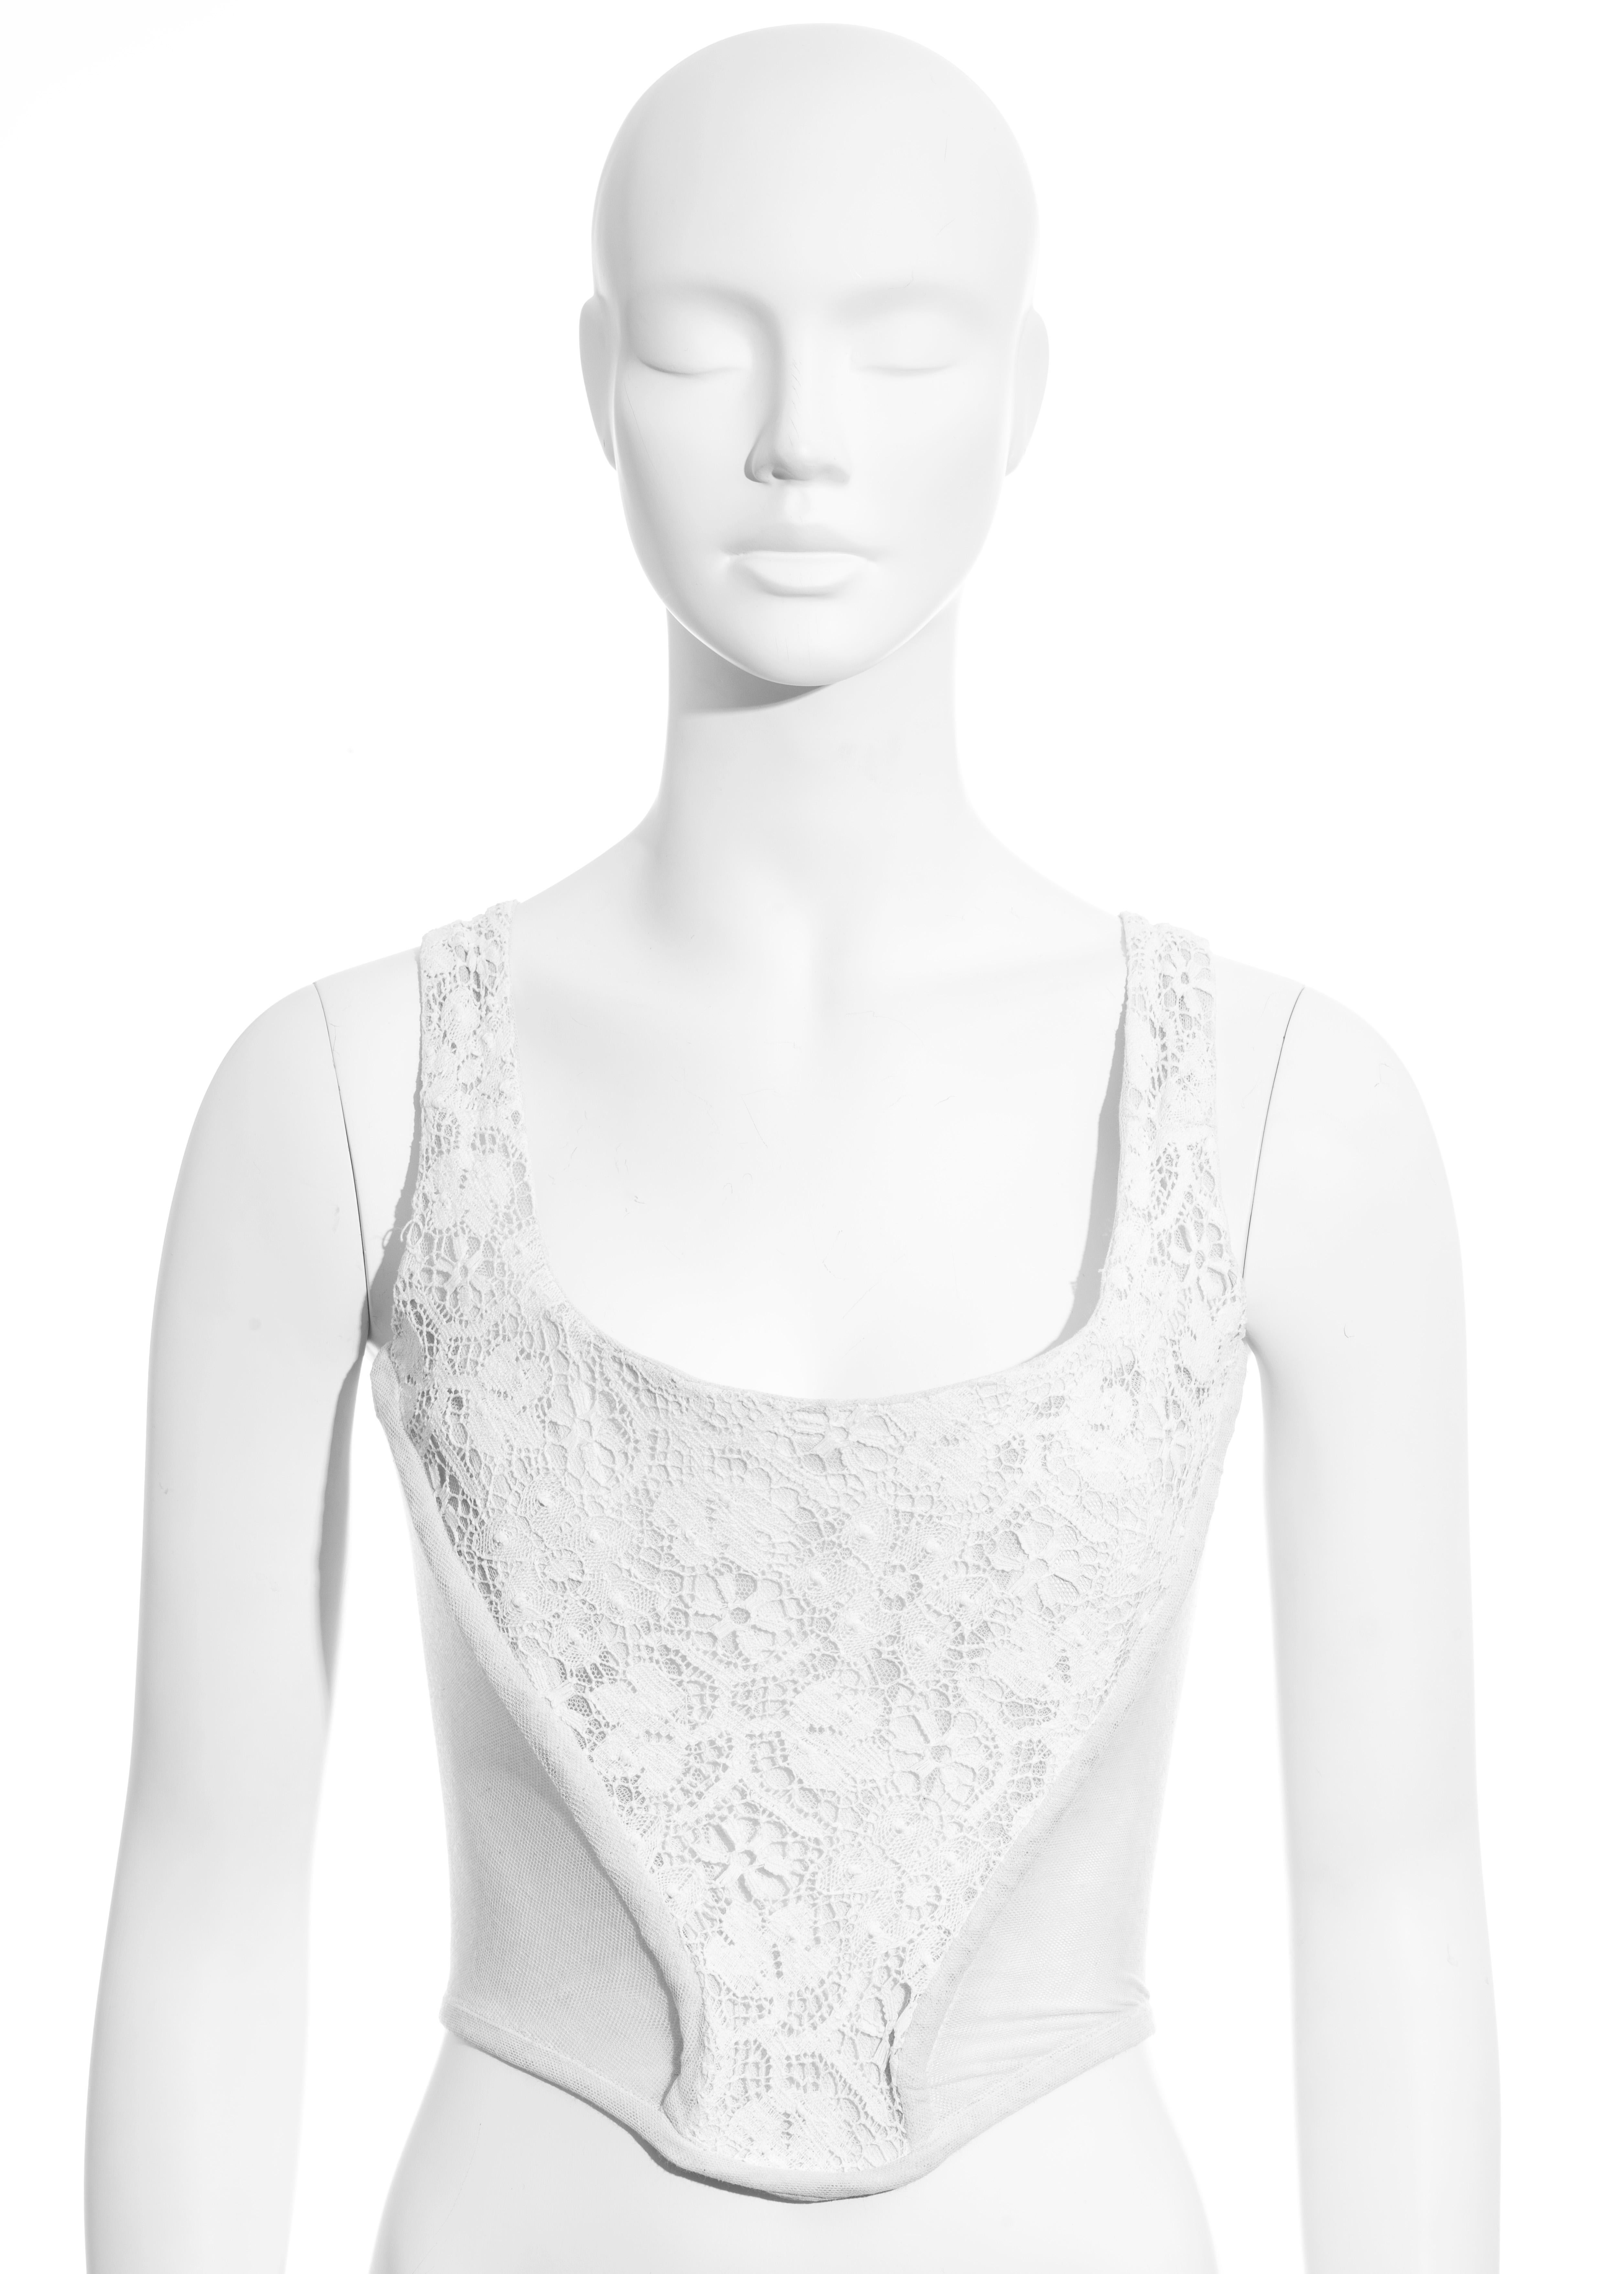 ▪ Vivienne Westwood white corset
▪ Cotton lace front and back panel 
▪ Mesh sides 
▪ Back zip fastening 
▪ Internal boning 
▪ UK 12 - FR 40 - US 8
▪ Fall-Winter 1994